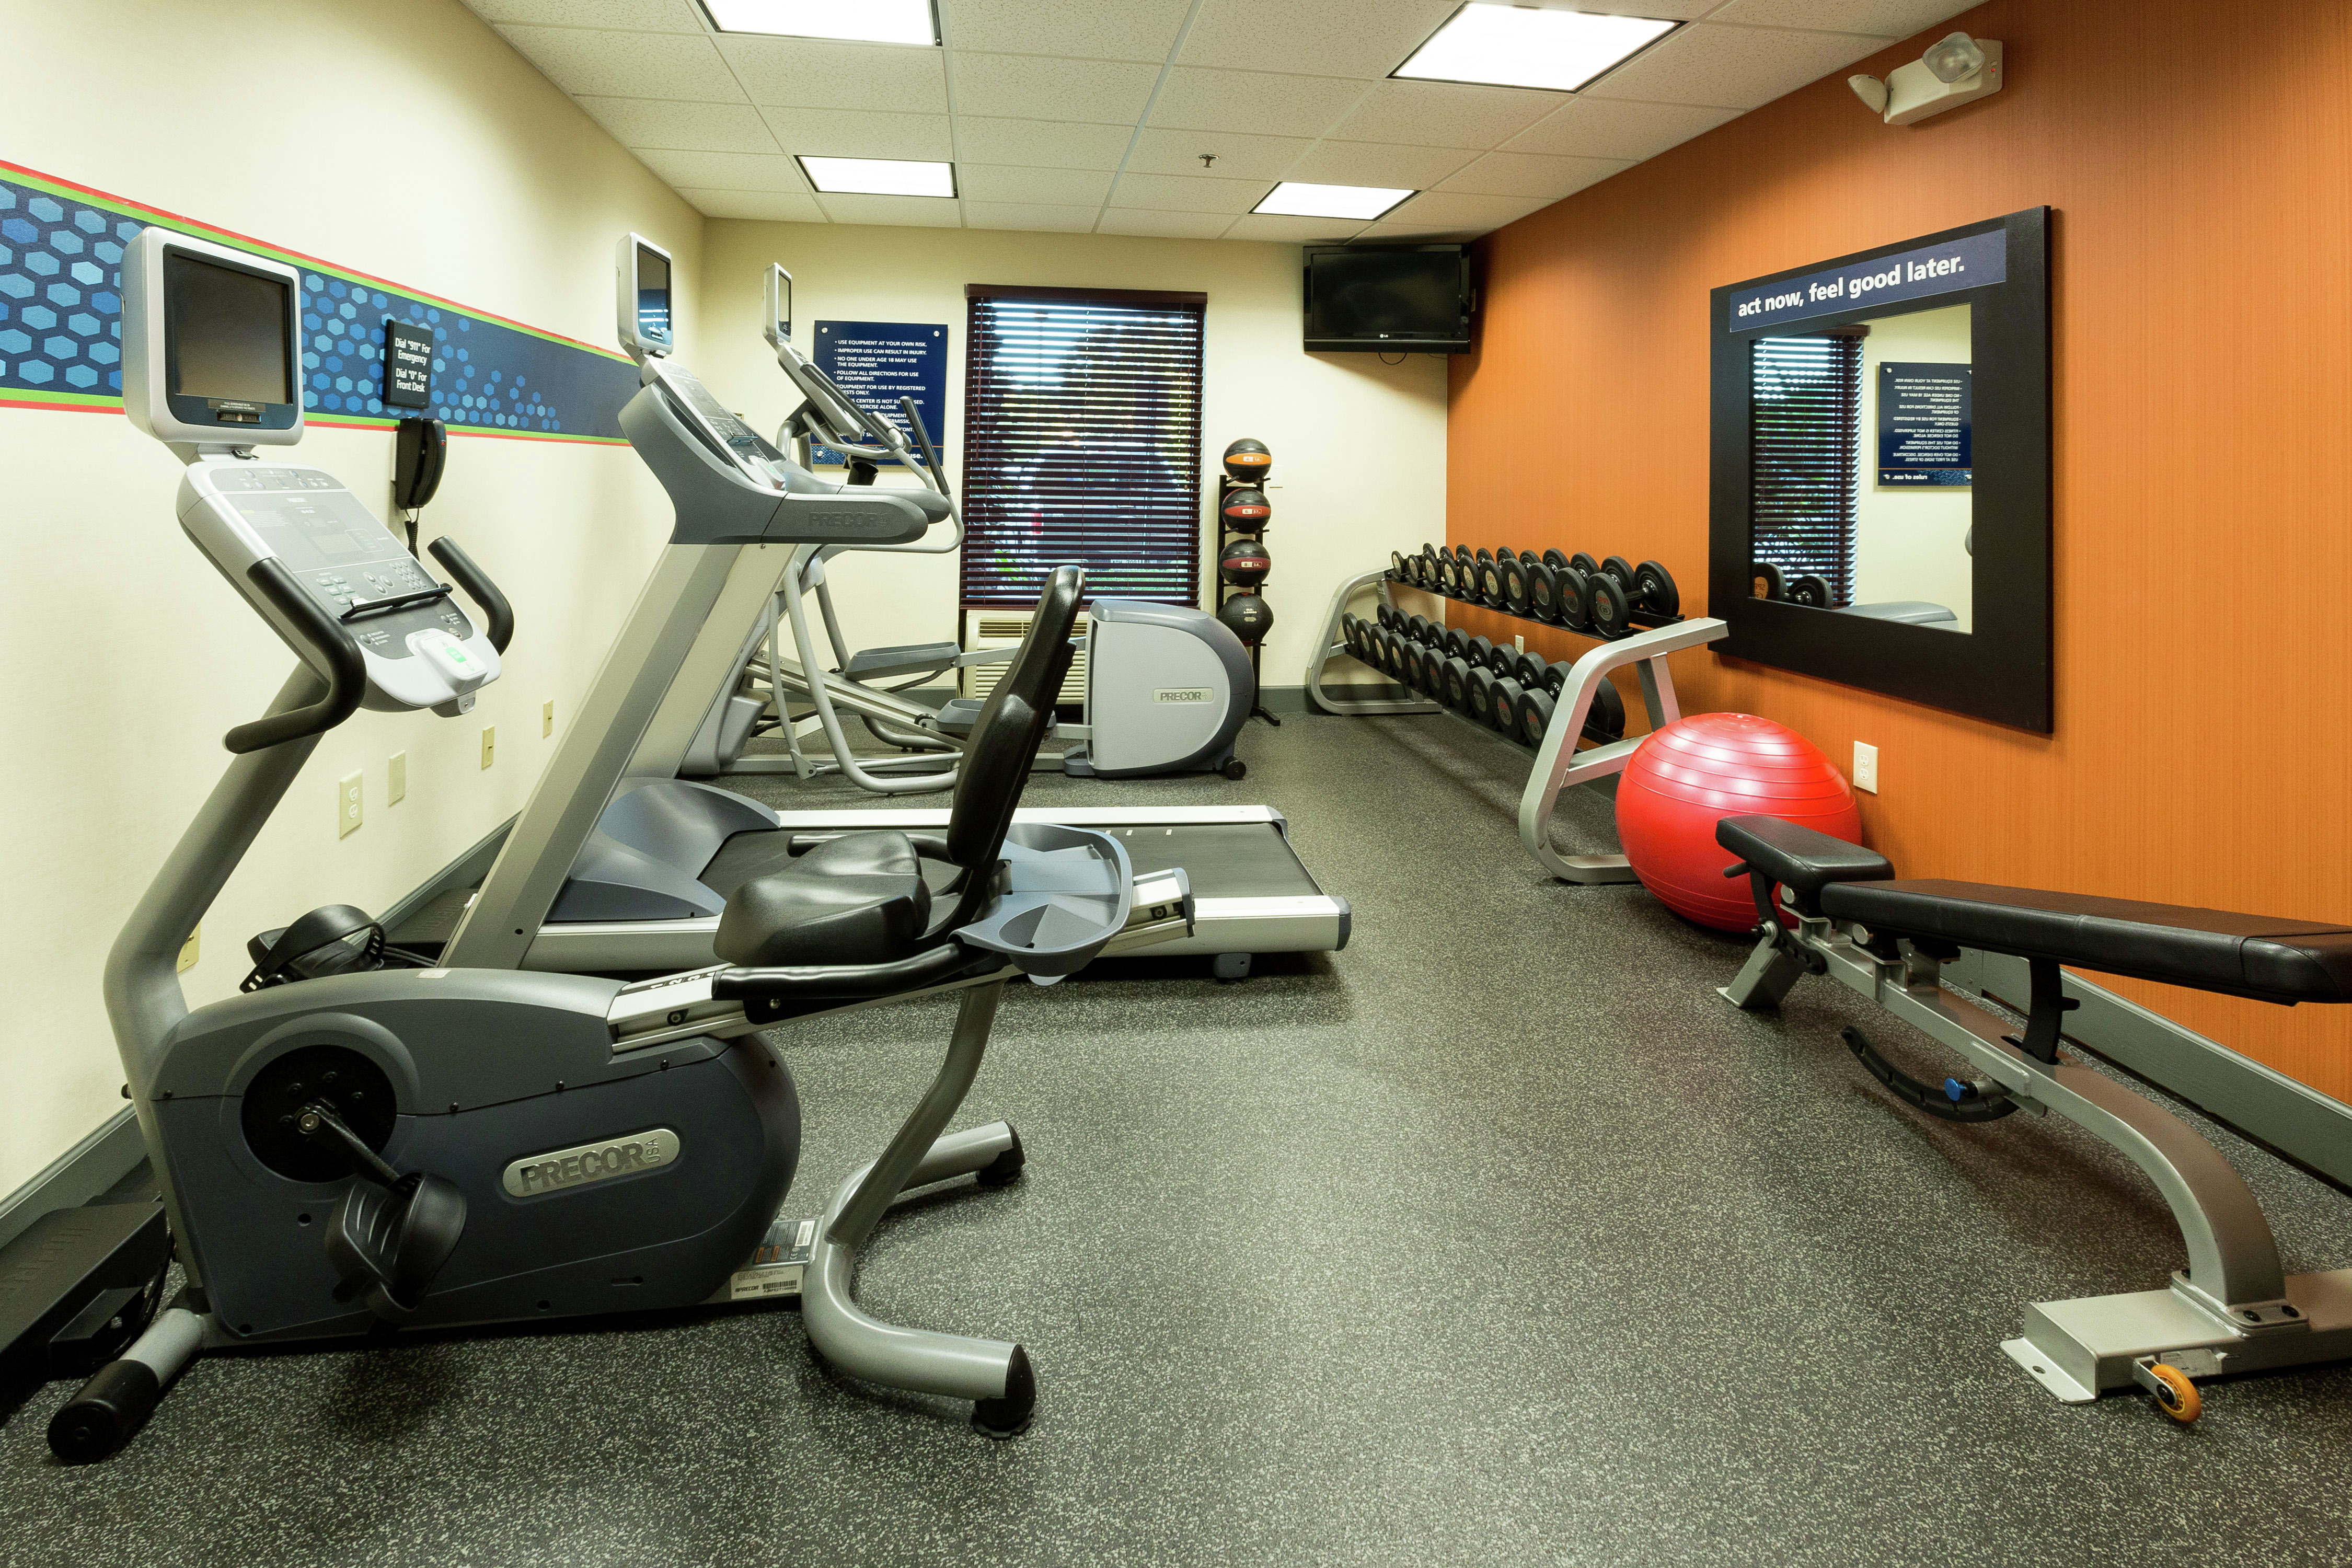 Fitness Center With Weight Balls, TV, Free Weights, Large Wall Mirror, Red Stability Ball, Weight Bench, and Cardio Equipment